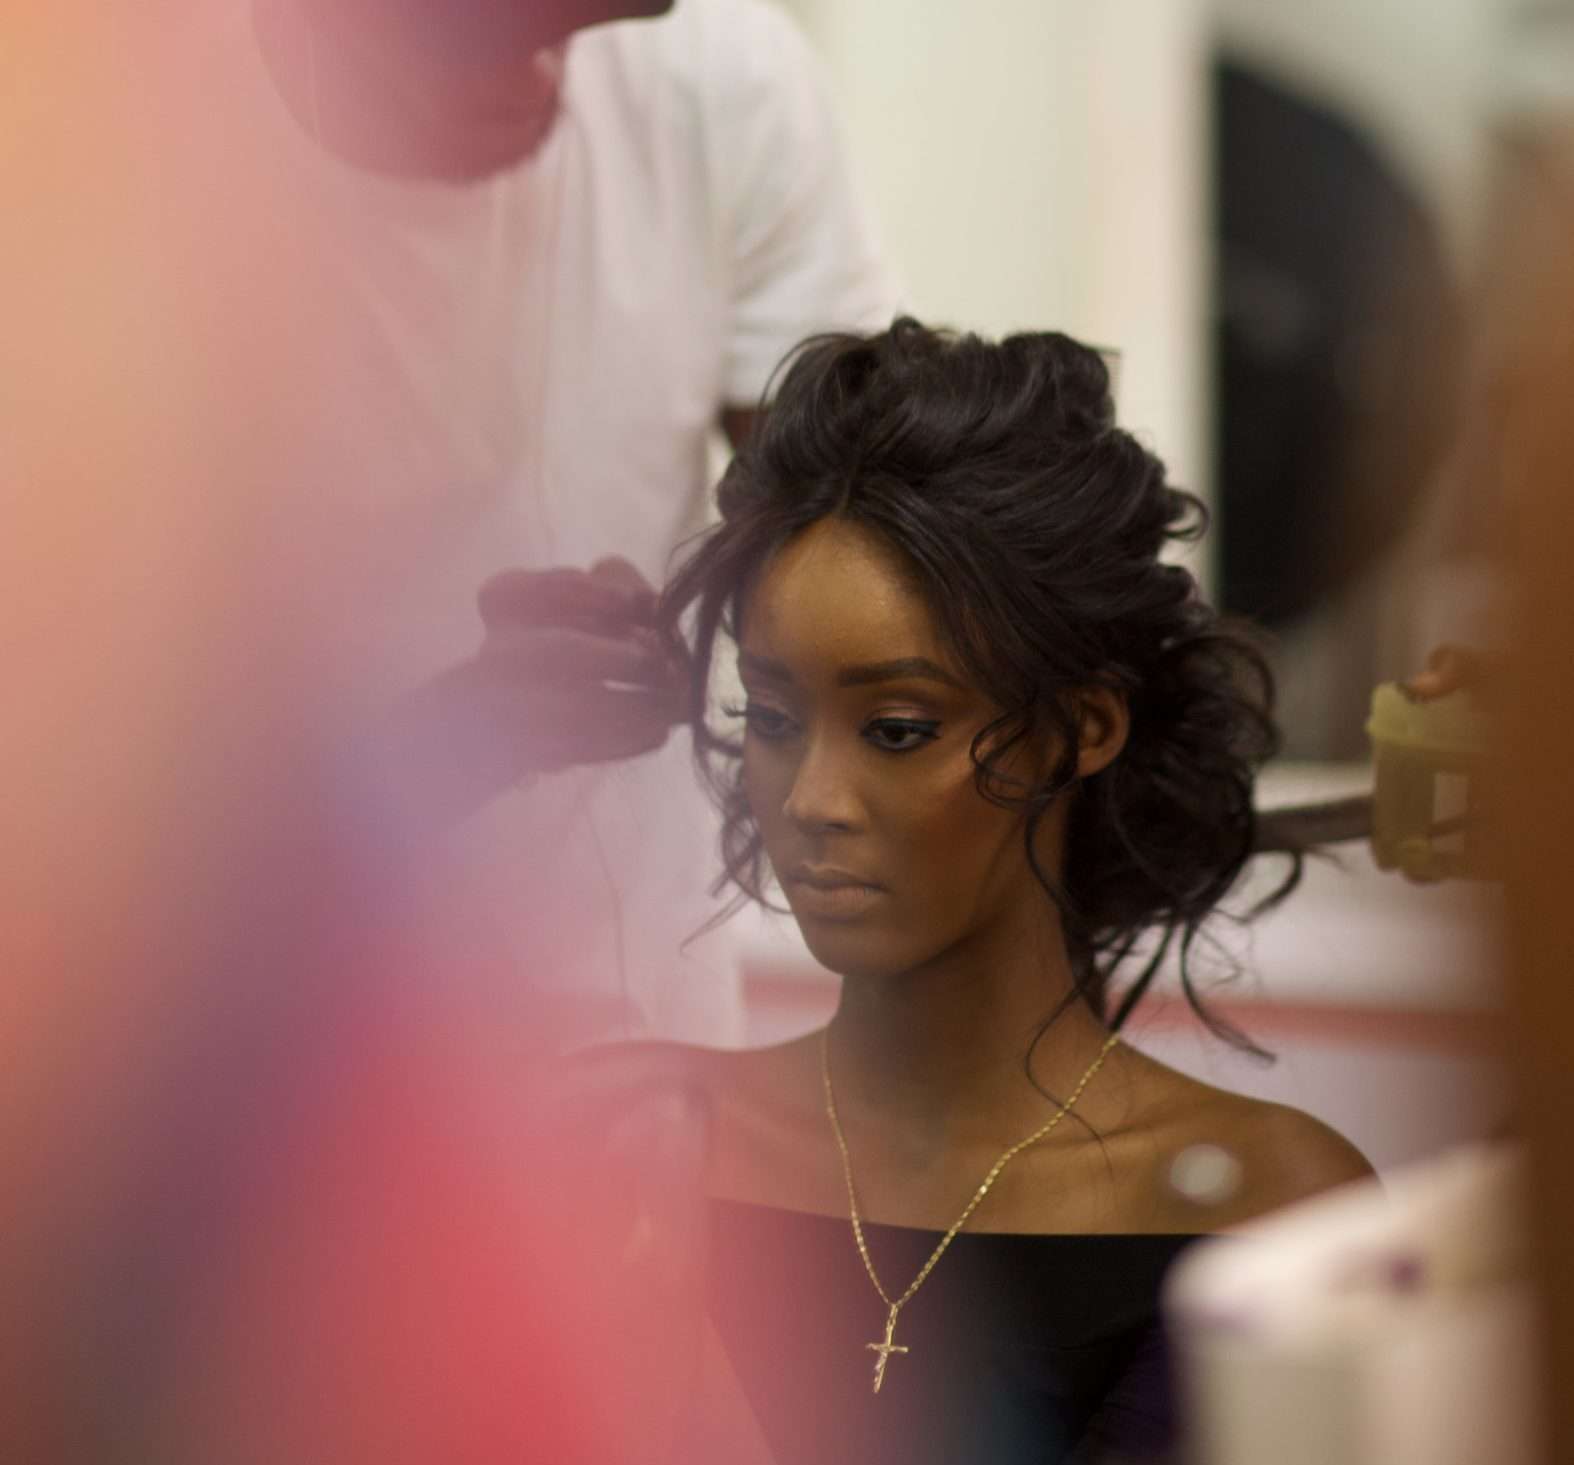 The City of Liverpool CollegeCollege Launches Hairdressing Course  Specialising in Afro-Textured Hair - The City of Liverpool College